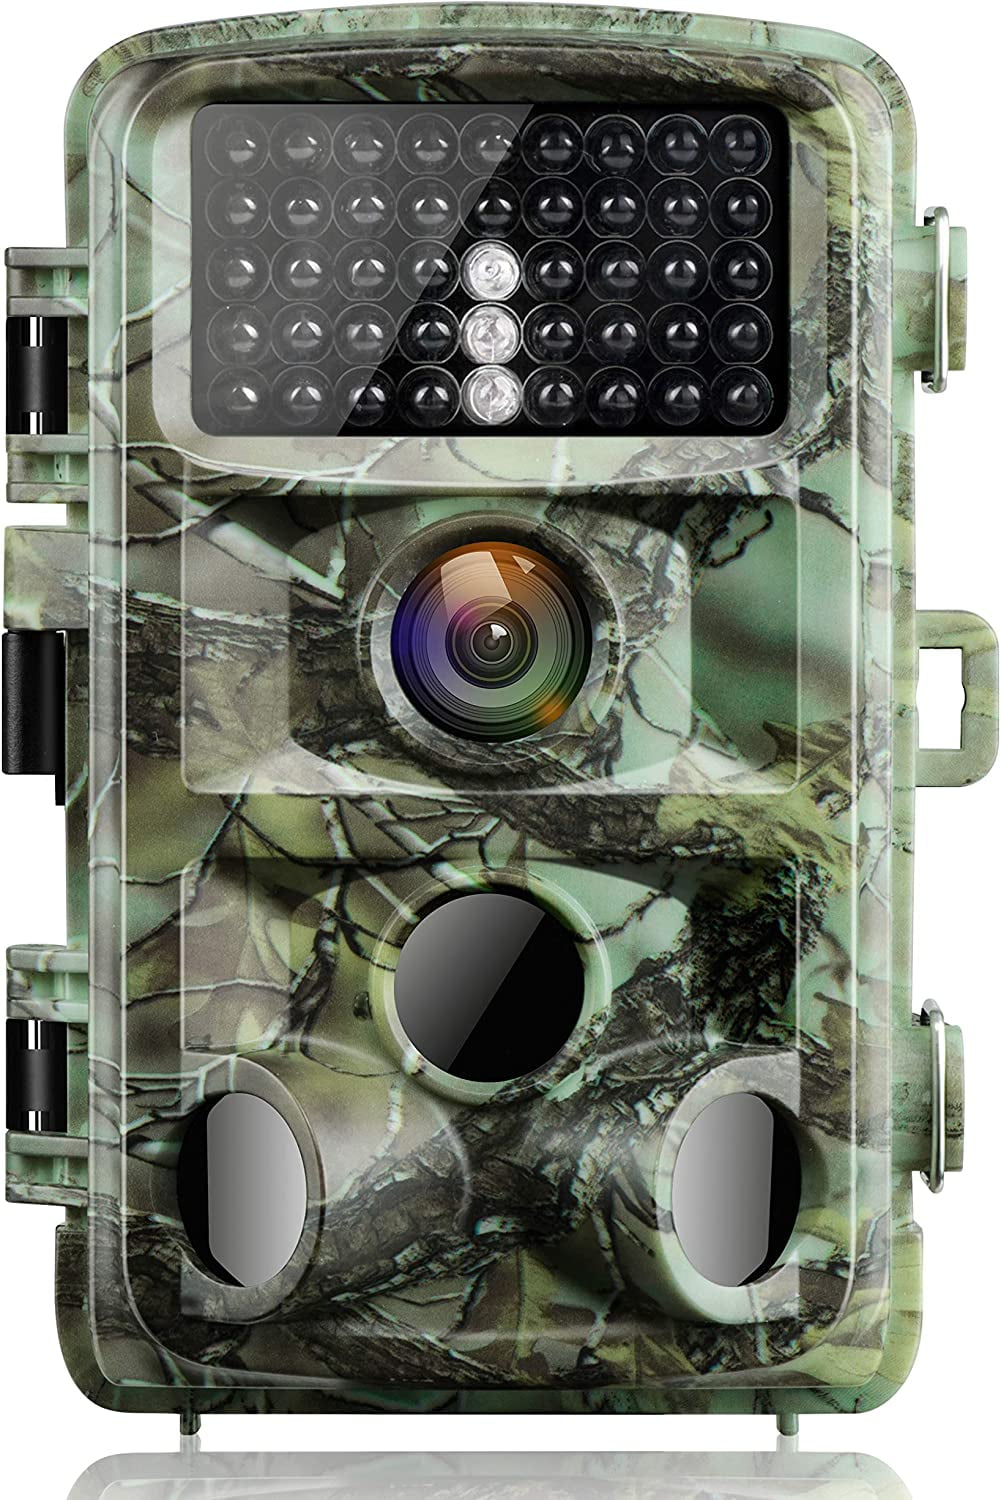 Campark Trail Game Camera 16MP 1080P FHD Waterproof IR Hunting Scouting Wildlife 